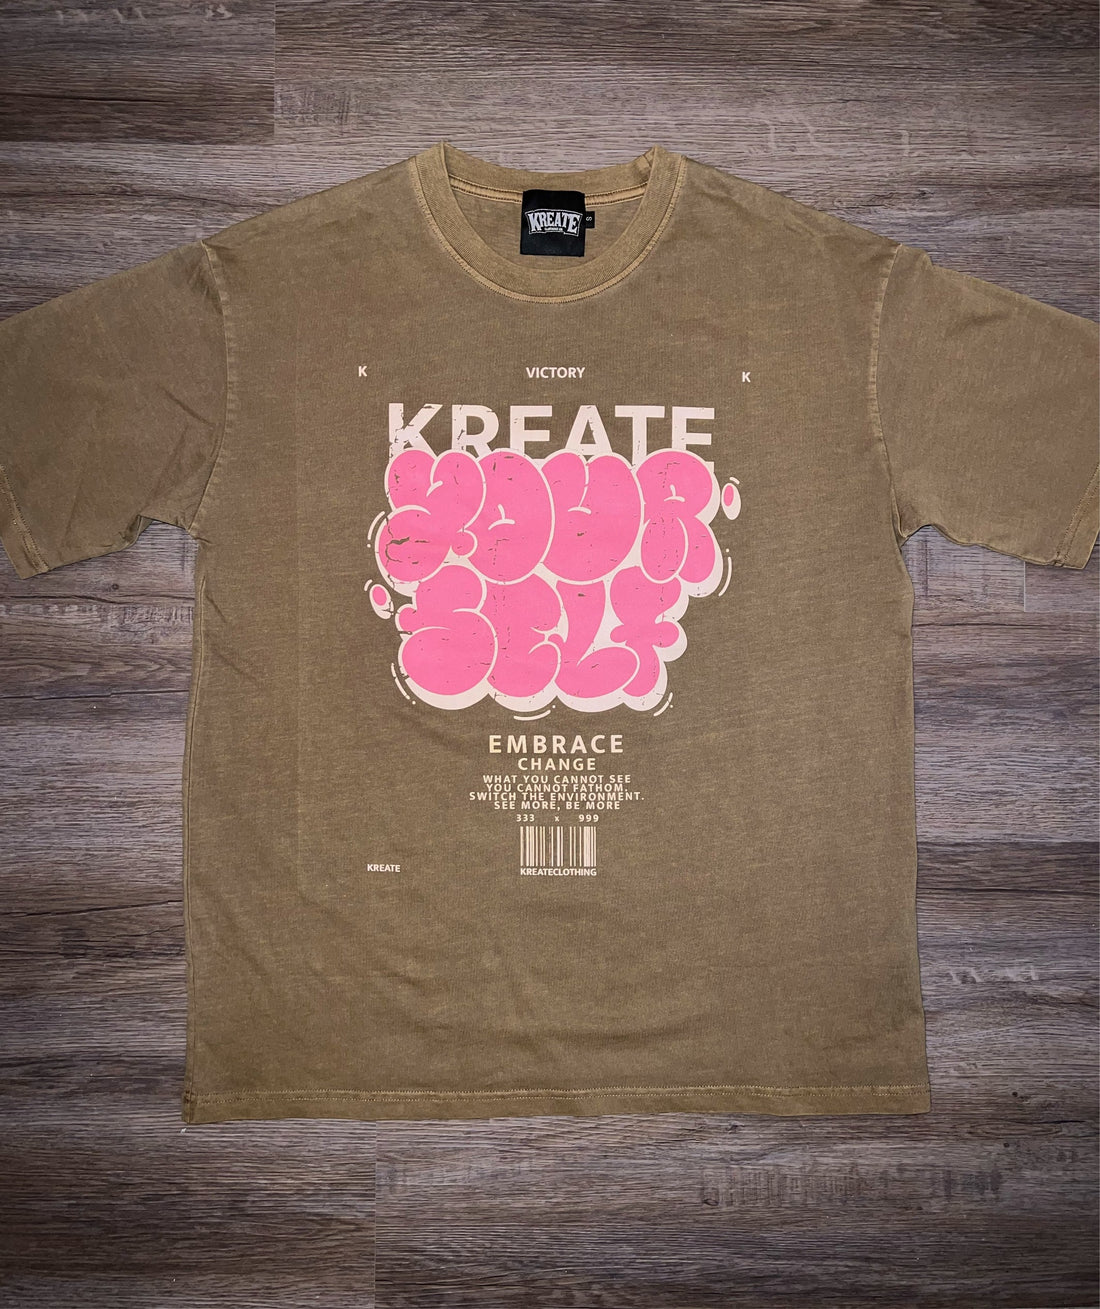 Kreate Yourself T-Shirt (Vintage Brown/Pink)